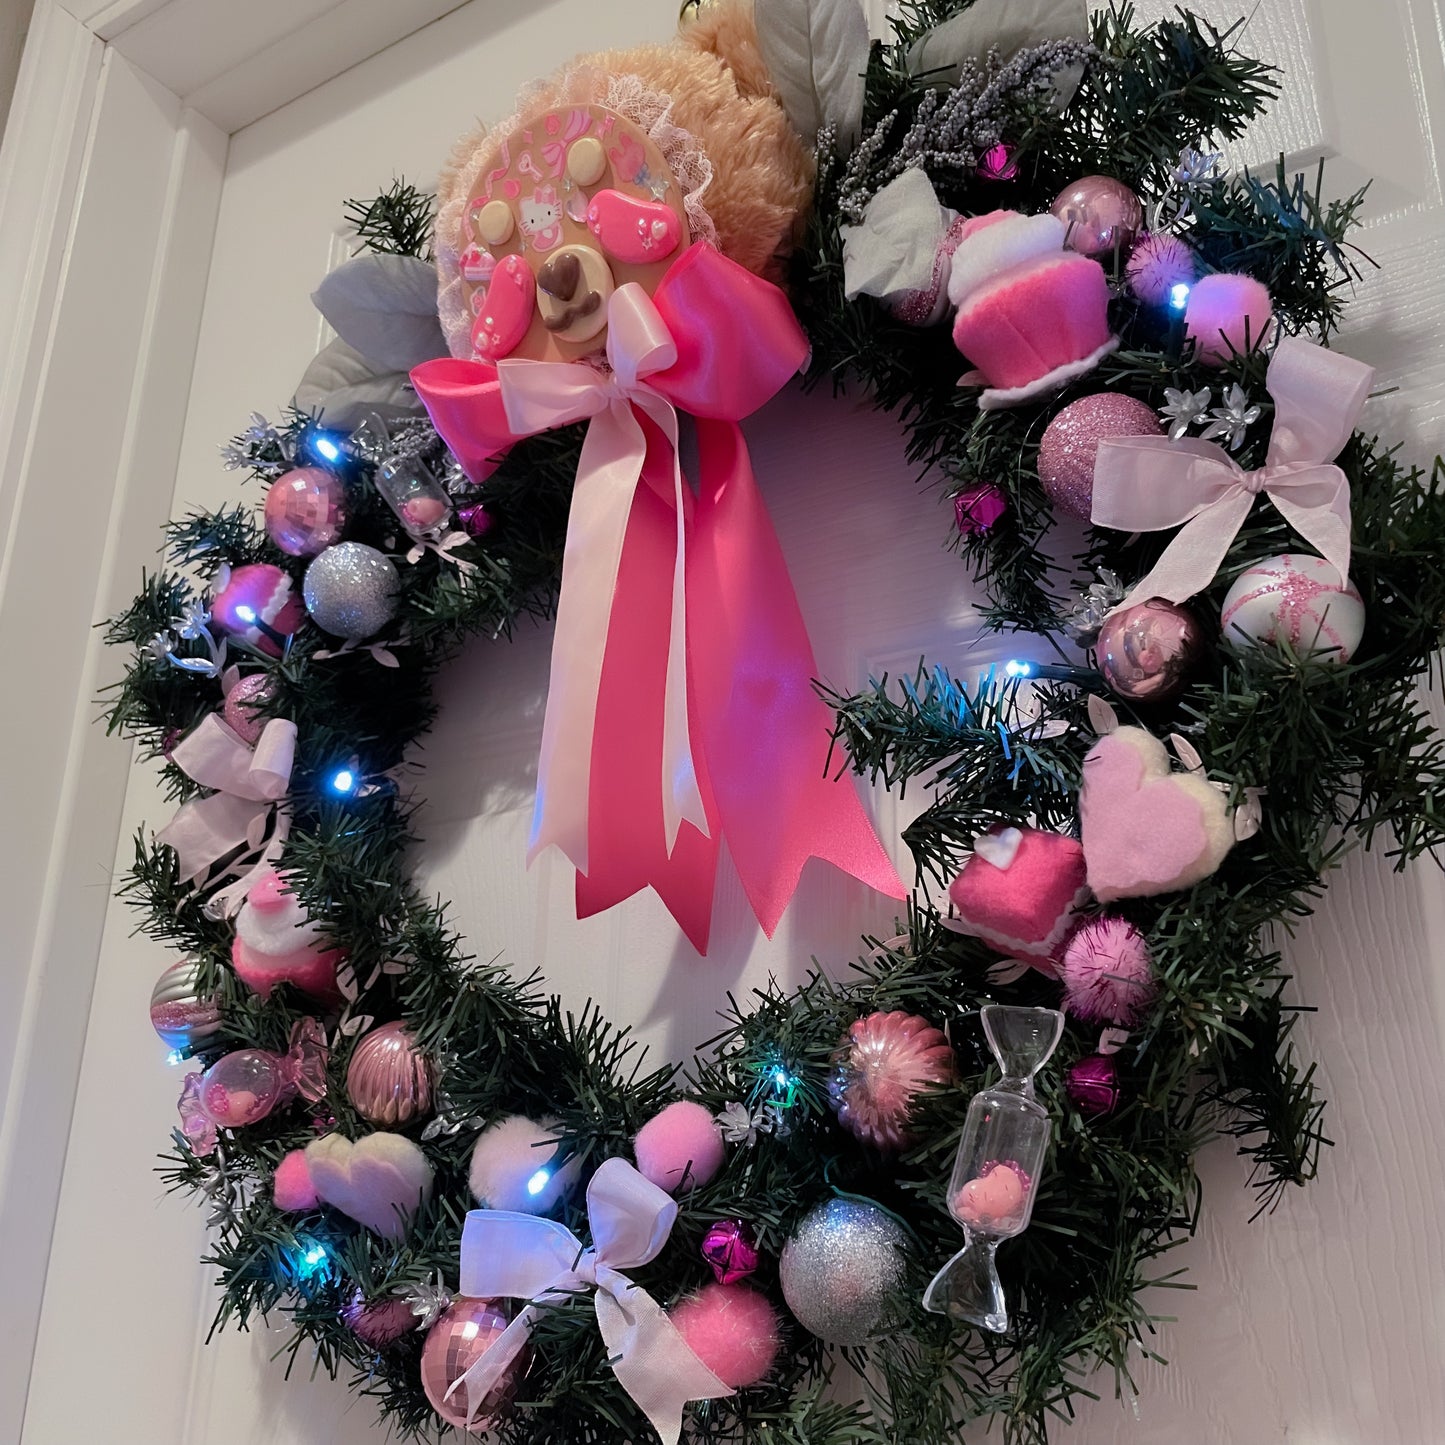 Holly the Holiday Wreath